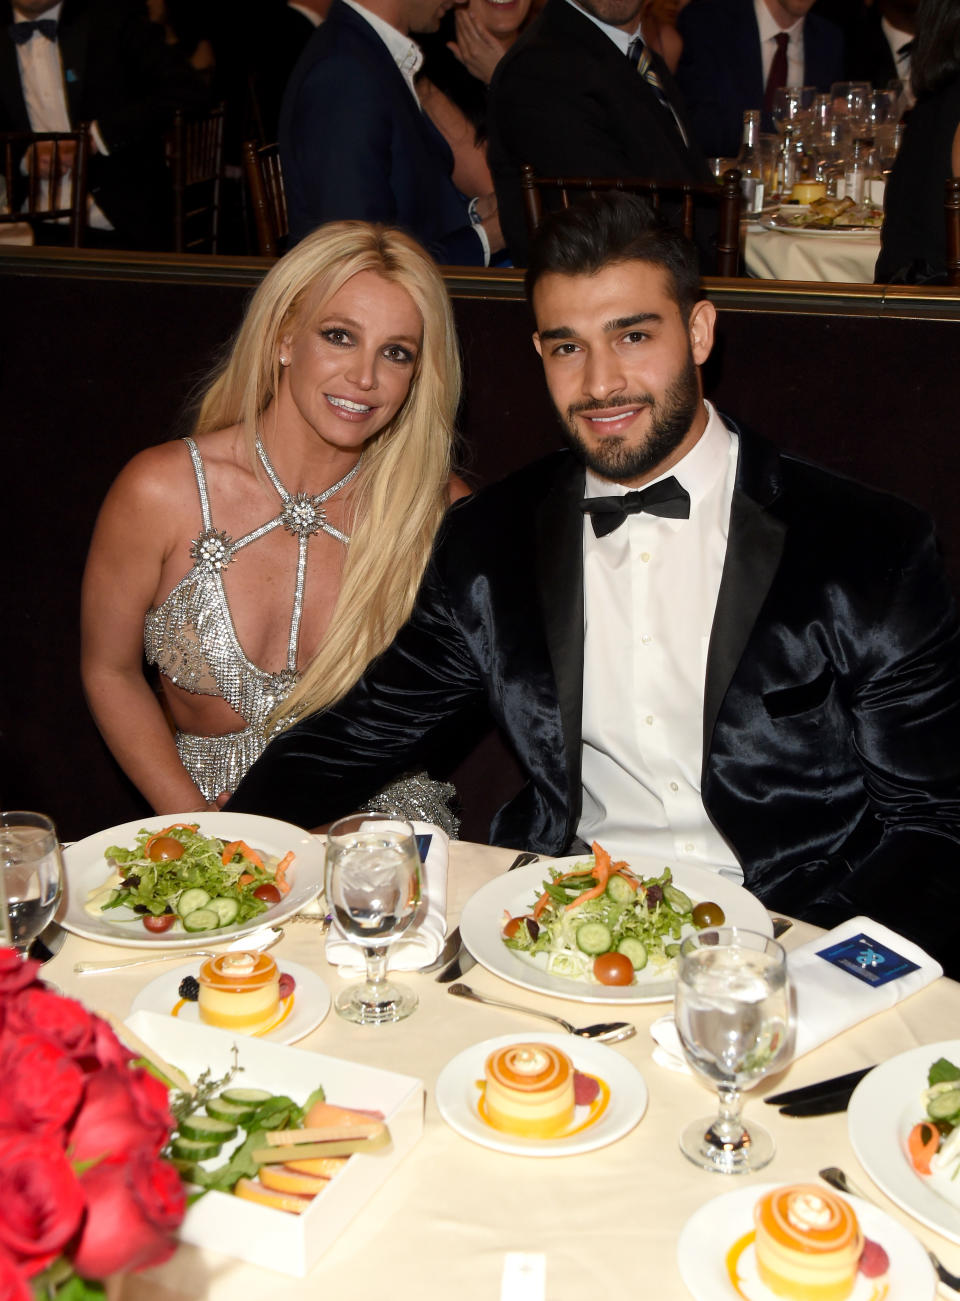 Honoree Britney Spears and her date, Sam Asghari, at the GLAAD Media Awards at the Beverly Hilton Hotel in Los Angeles, April 12, 2018. (Photo: J. Merritt/Getty Images for GLAAD)